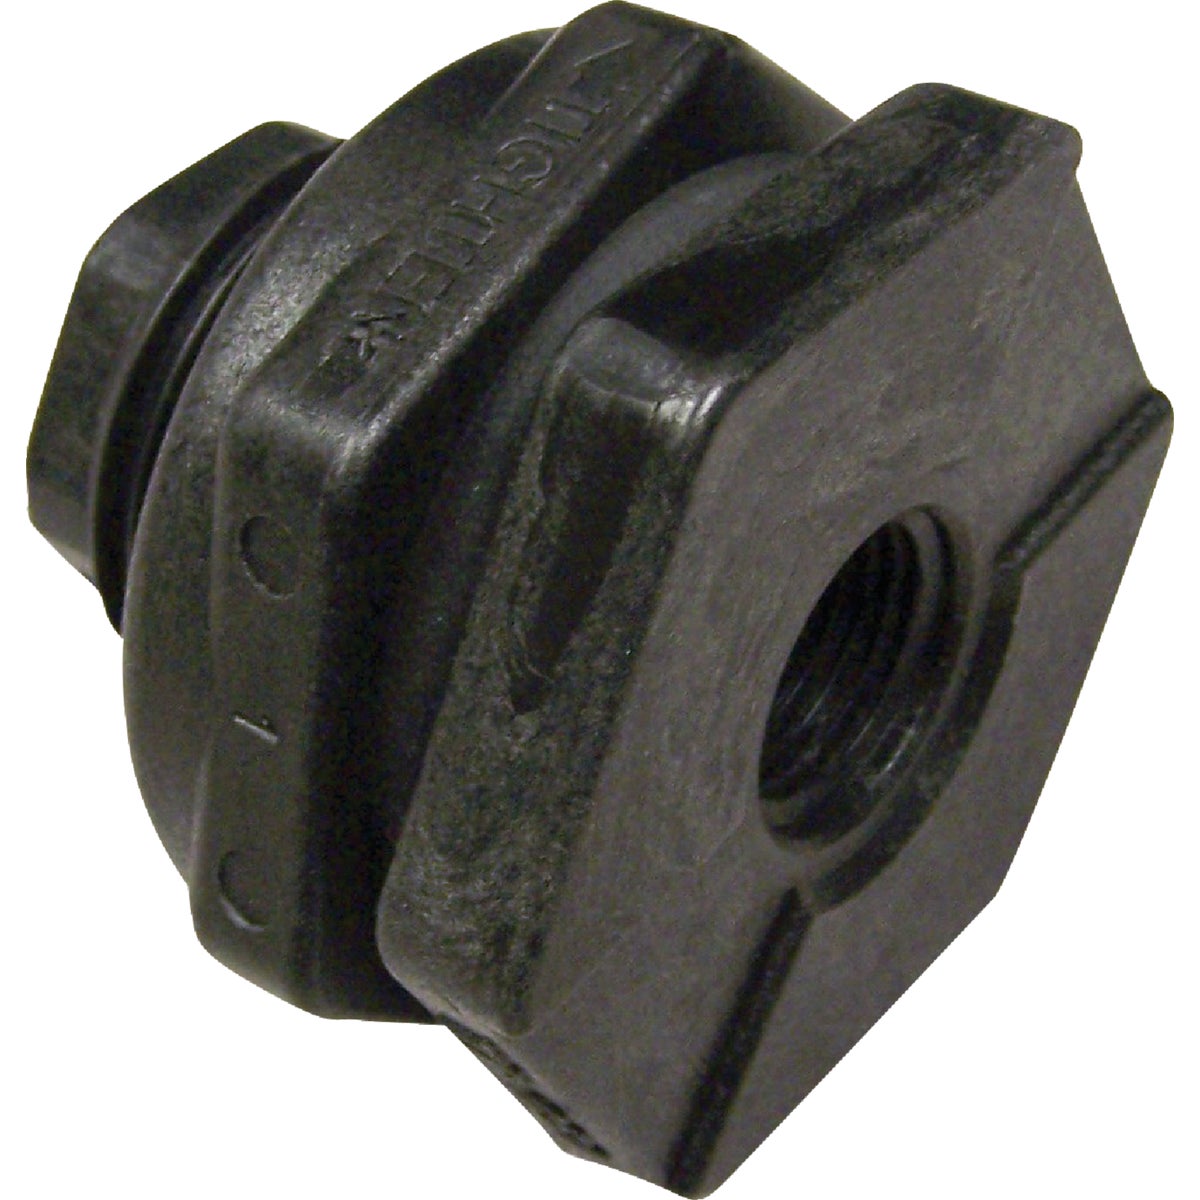 Item 465491, Bulkhead fittings are designed for easy adaptation and installation, 